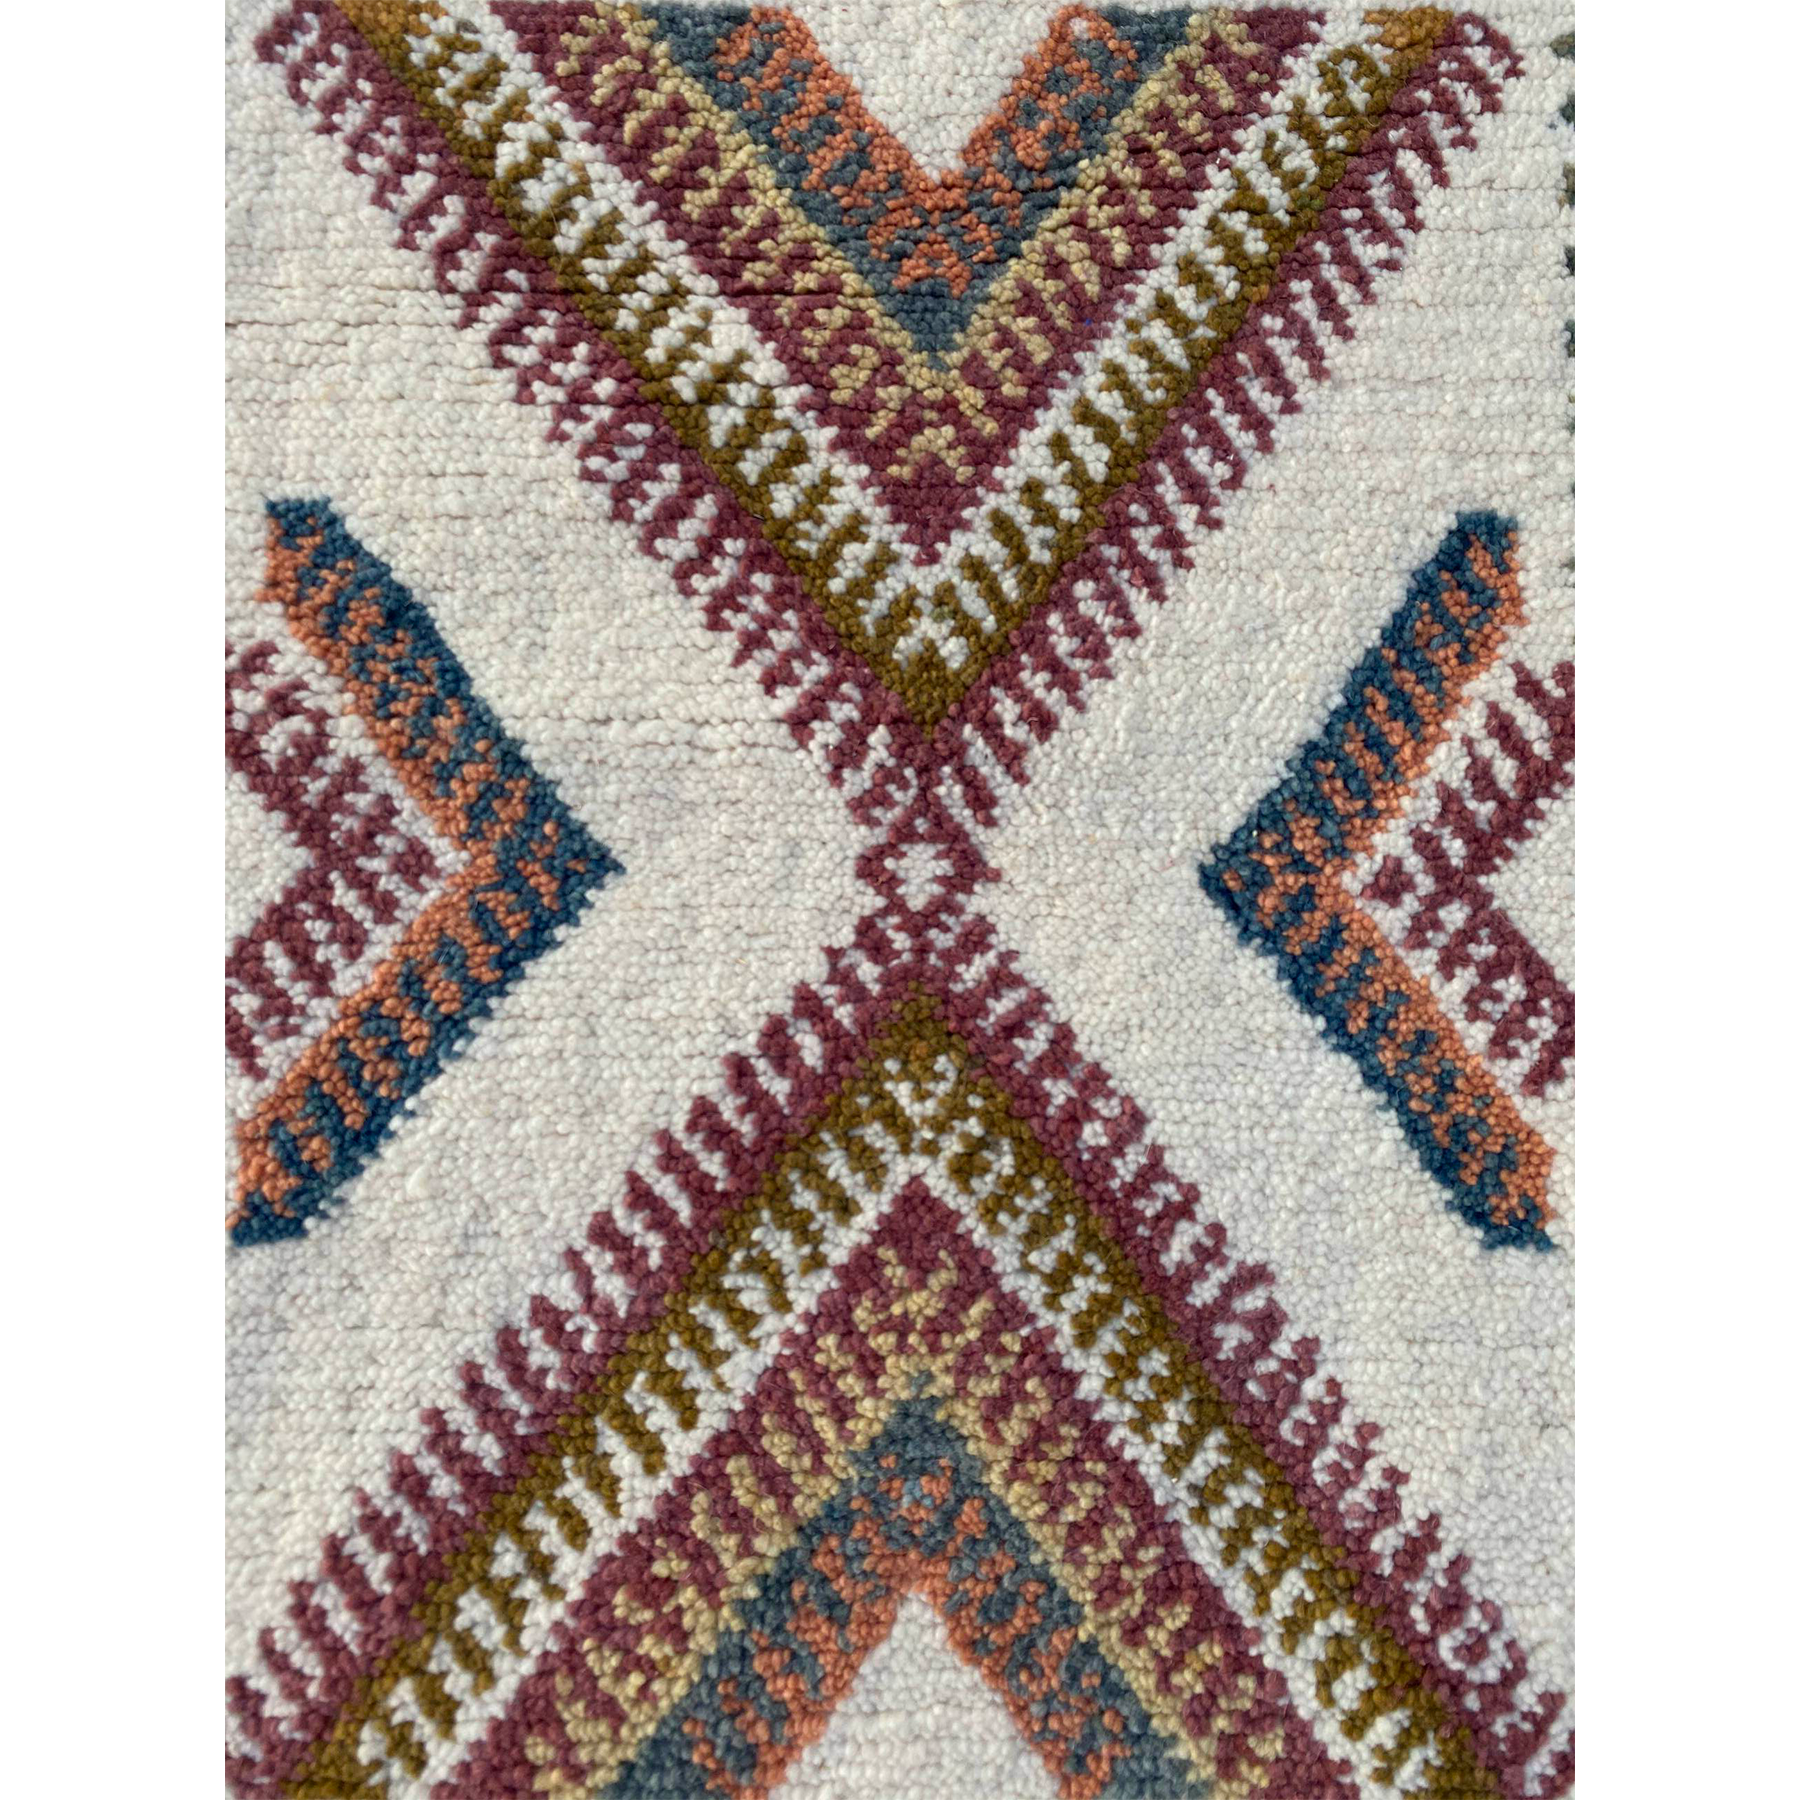 Authentic Berber throw rug with colorful geometric pattern - Kantara | Moroccan Rugs